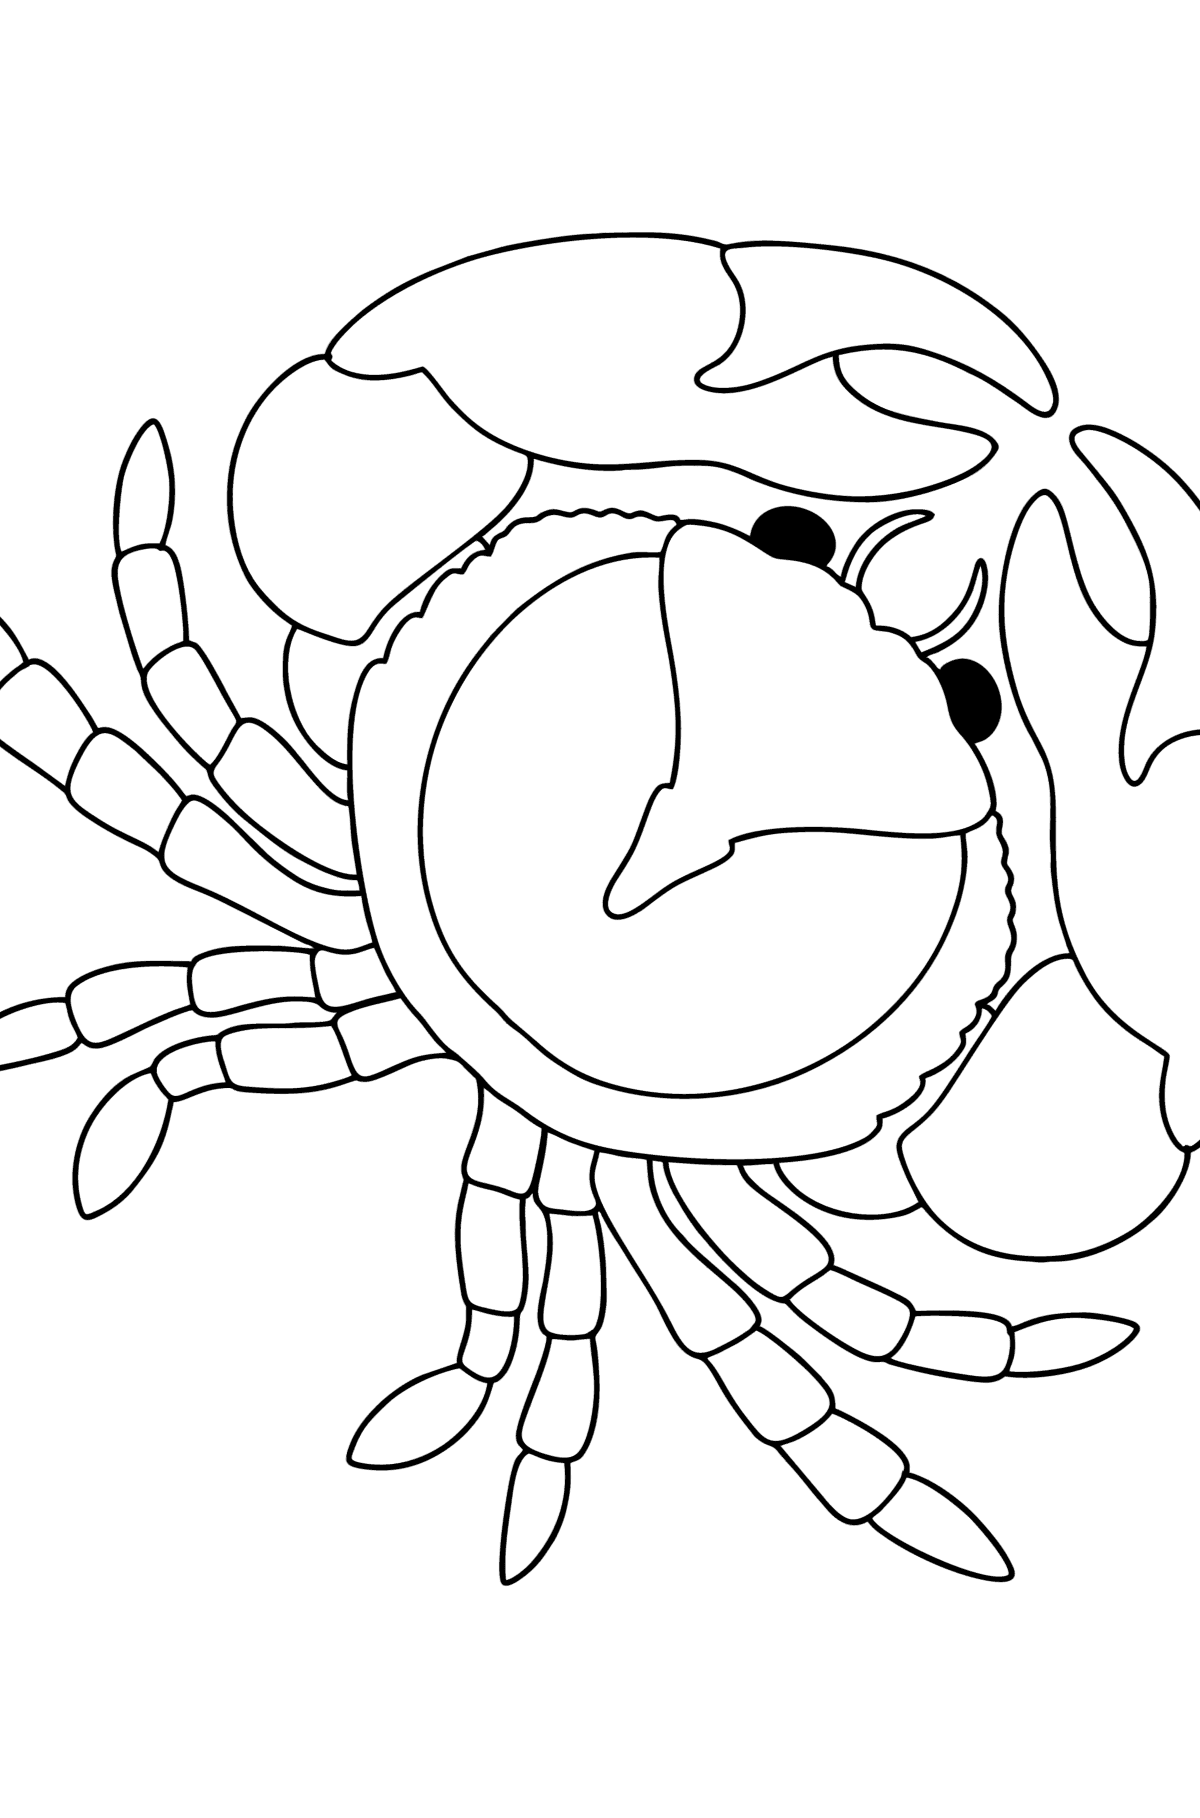 Sea ​​crab coloring page - Coloring Pages for Kids